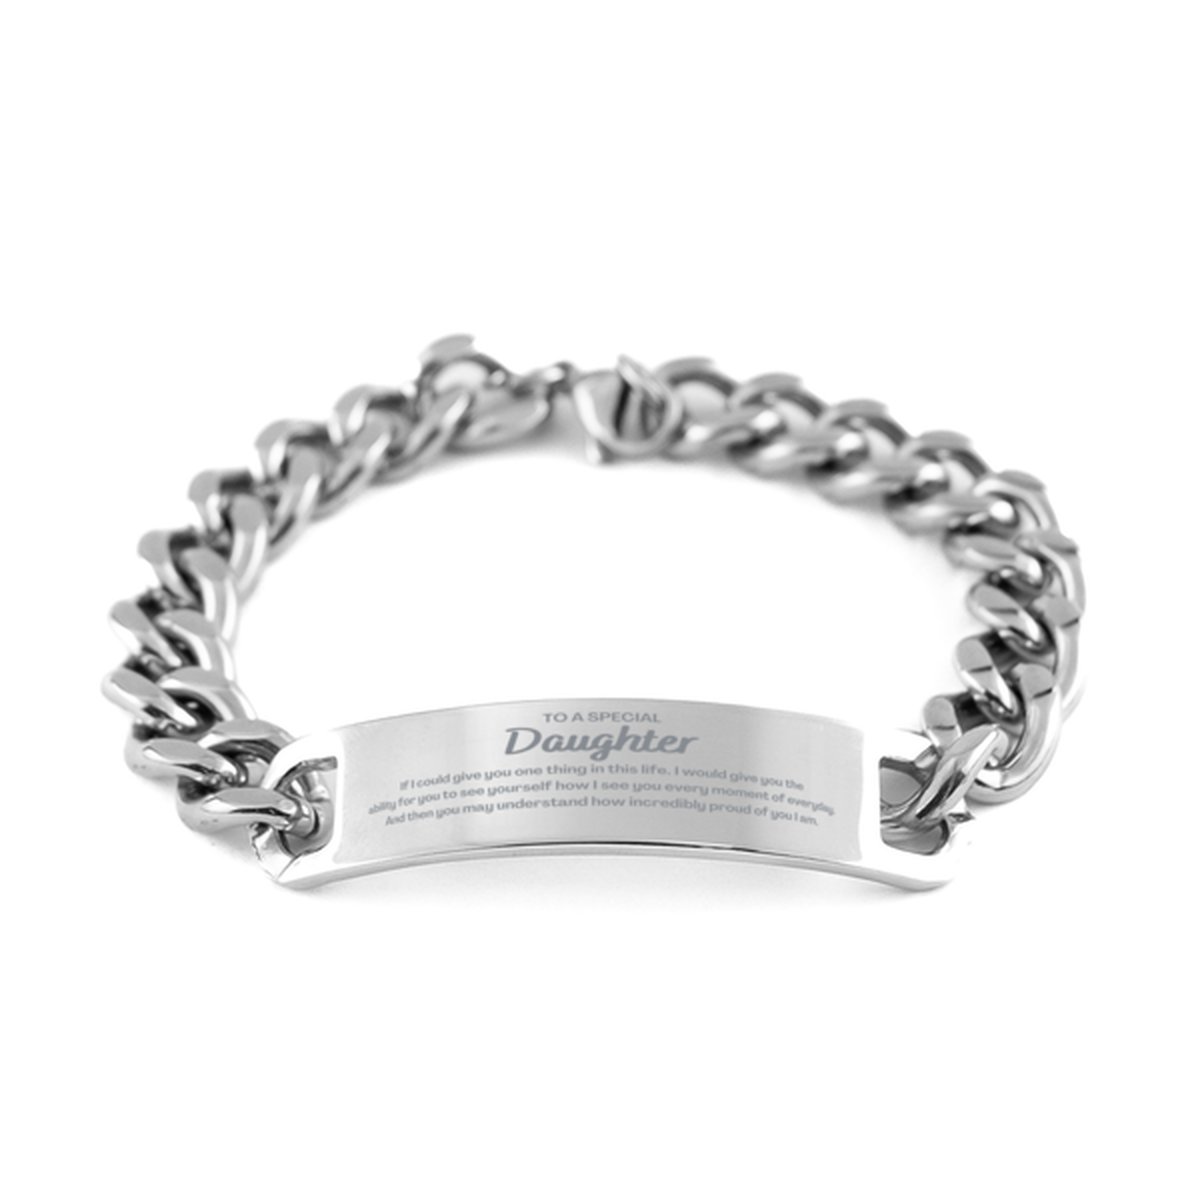 To My Daughter Cuban Chain Stainless Steel Bracelet, Gifts For Daughter Engraved, Inspirational Gifts for Christmas Birthday, Epic Gifts for Daughter To A Special Daughter how incredibly proud of you I am